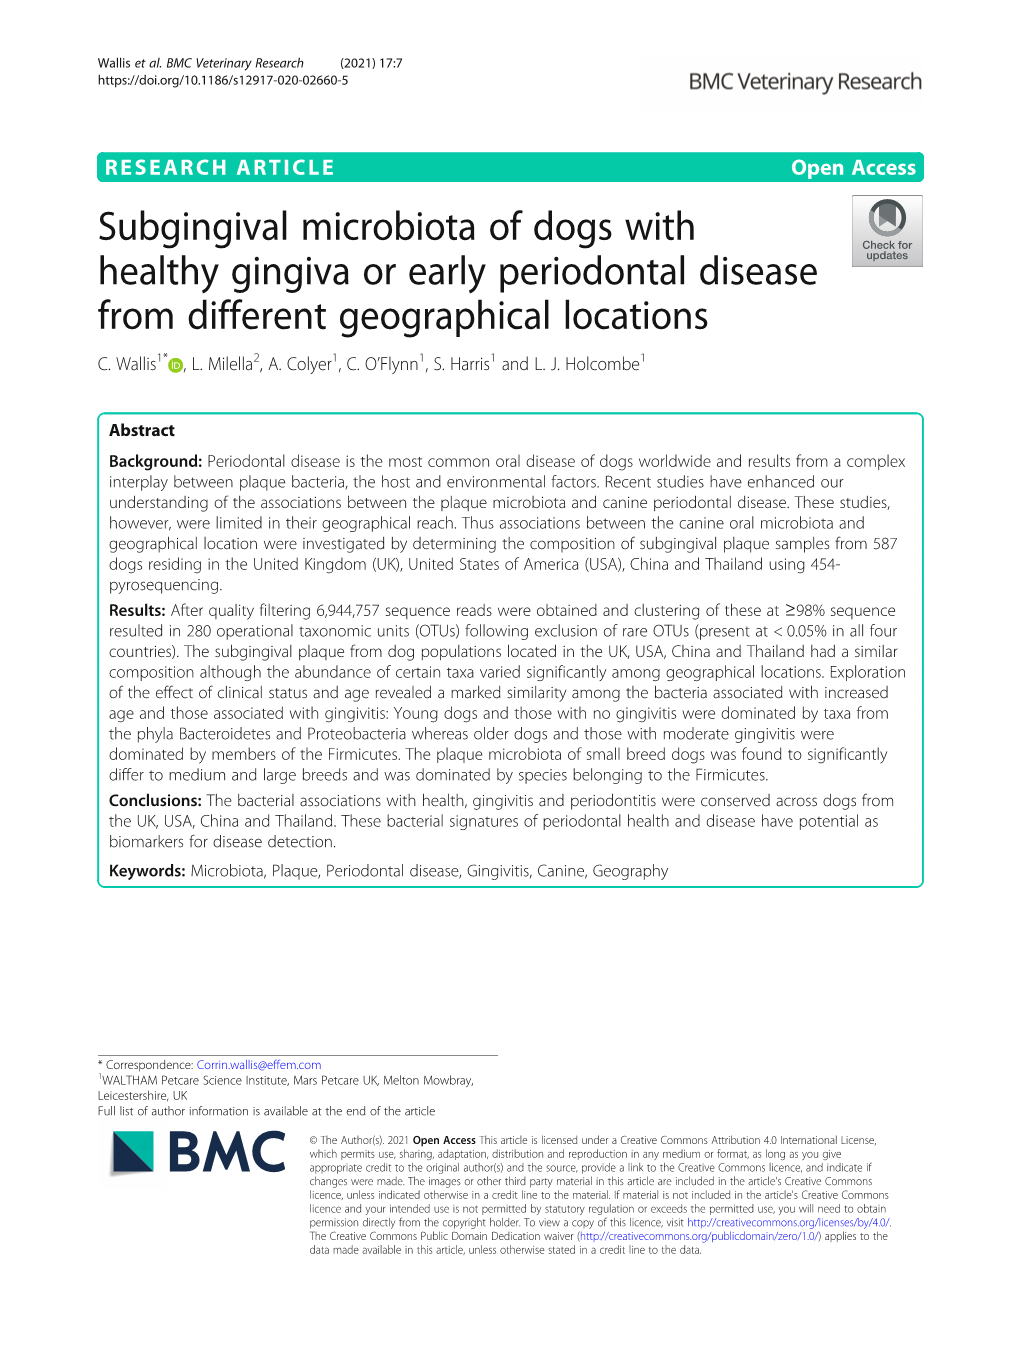 Subgingival Microbiota of Dogs with Healthy Gingiva Or Early Periodontal Disease from Different Geographical Locations C